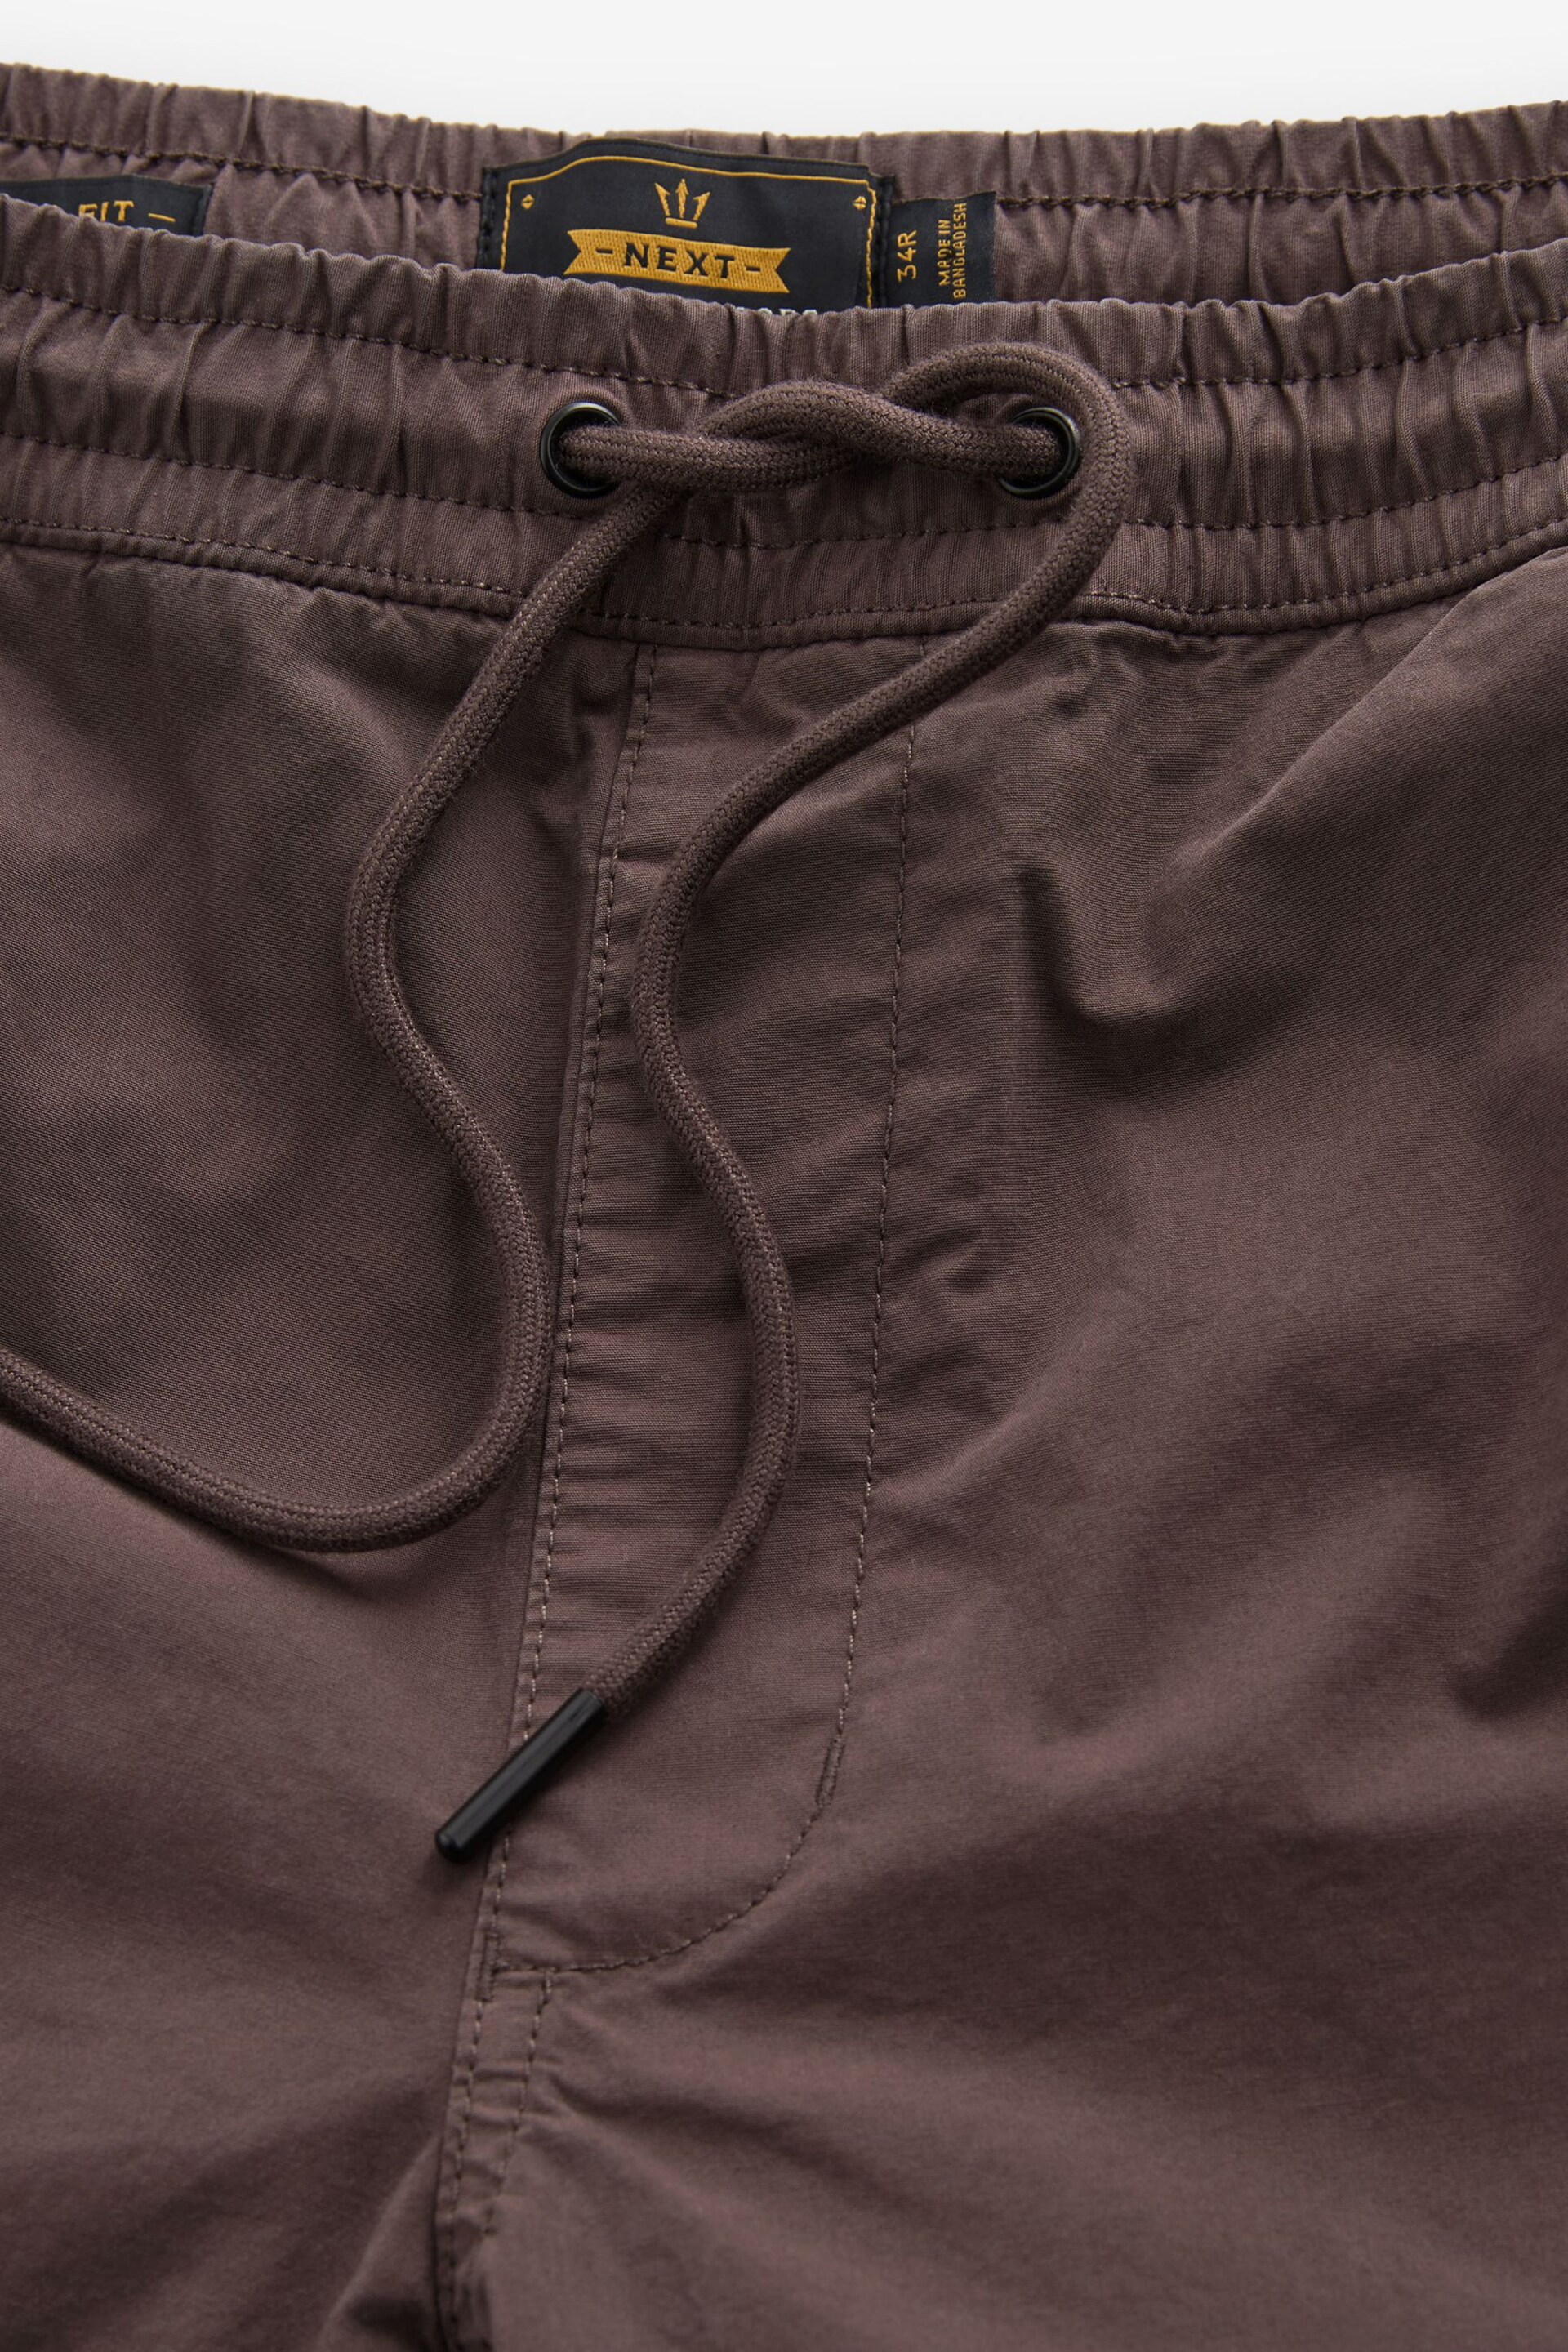 Purple Regular Tapered Stretch Utility Cargo Trousers - Image 3 of 6